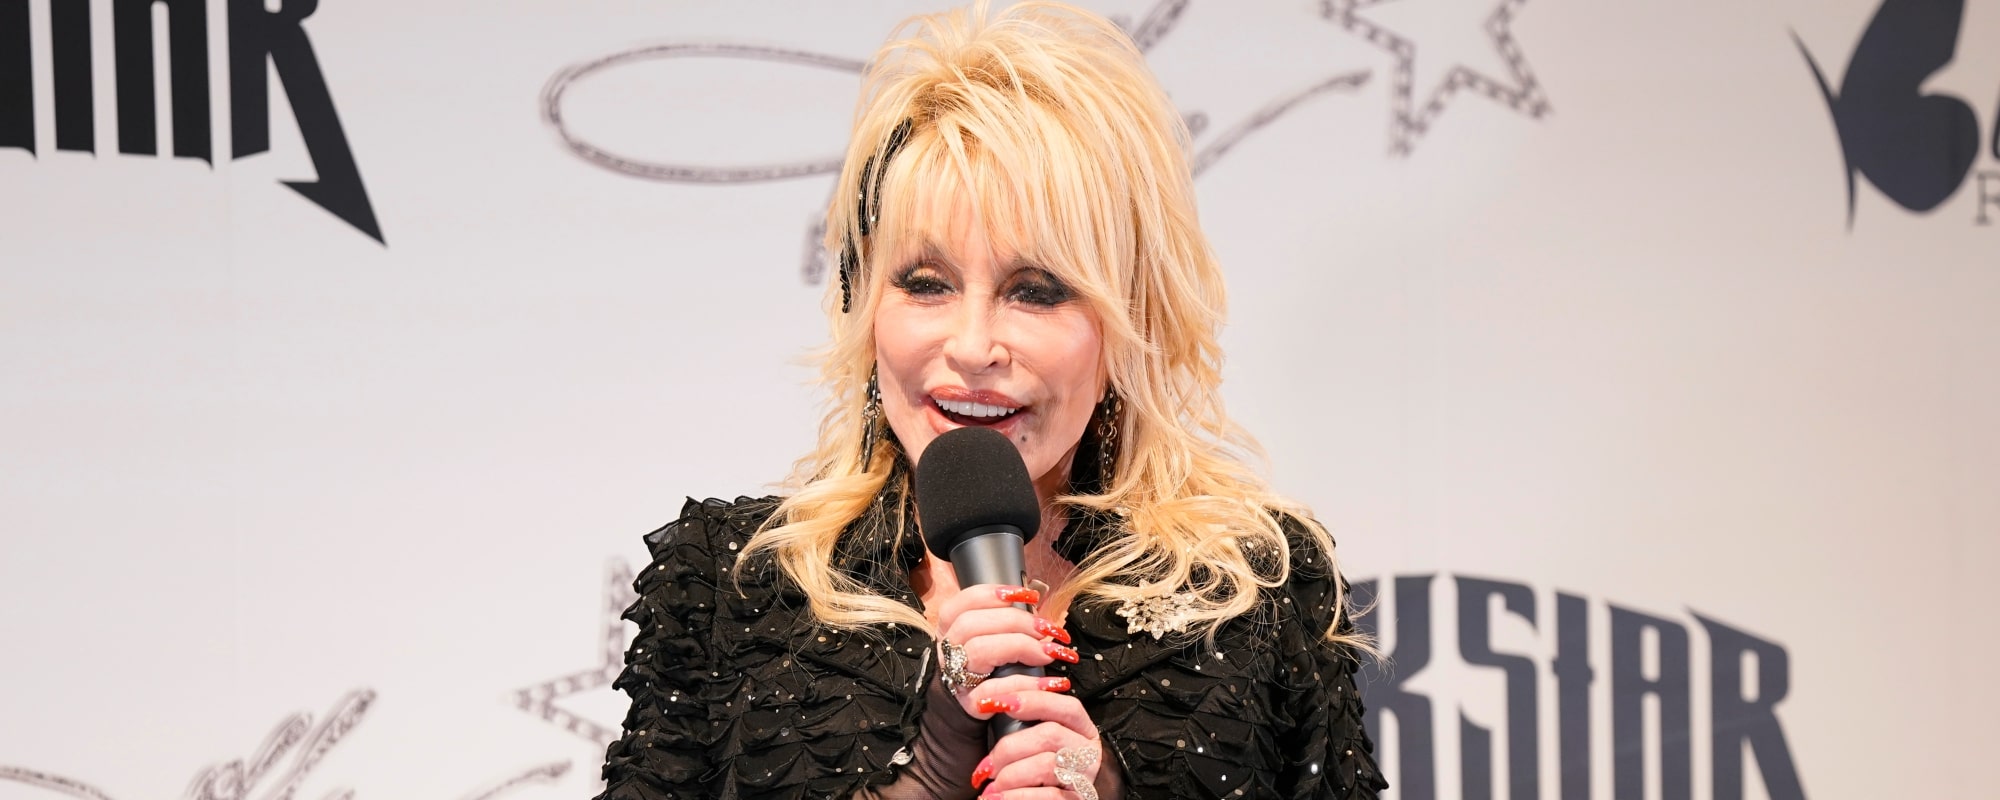 Dolly Parton’s Hometown Holds an Annual Singing Competition in Her Honor: Here’s How to Enter